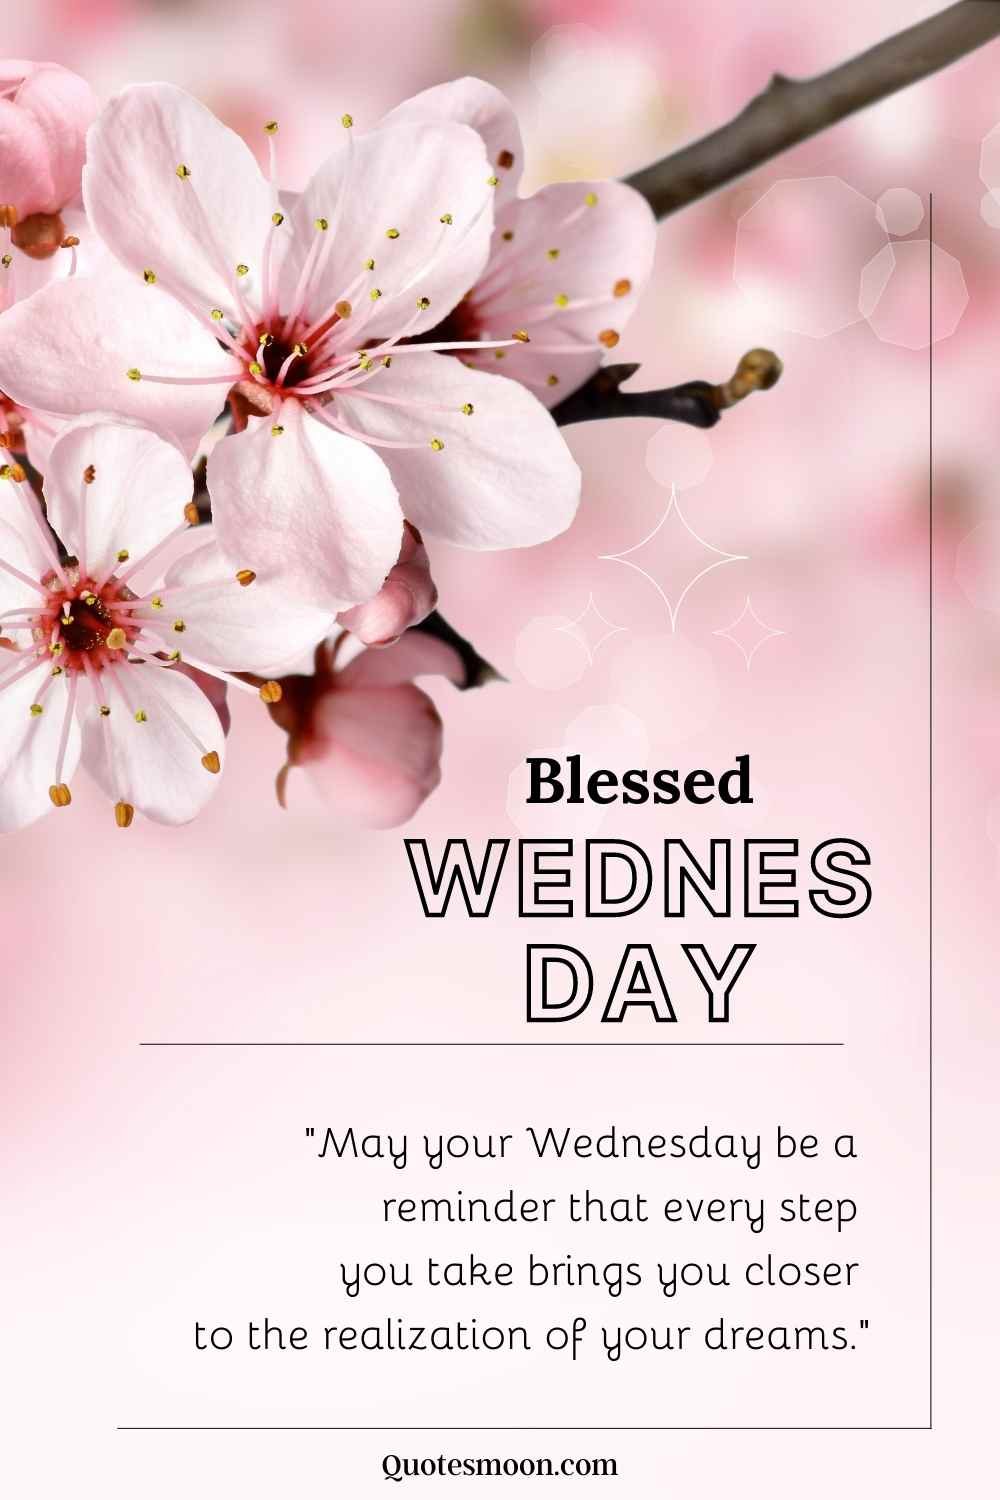 blessed wednesday wishes images